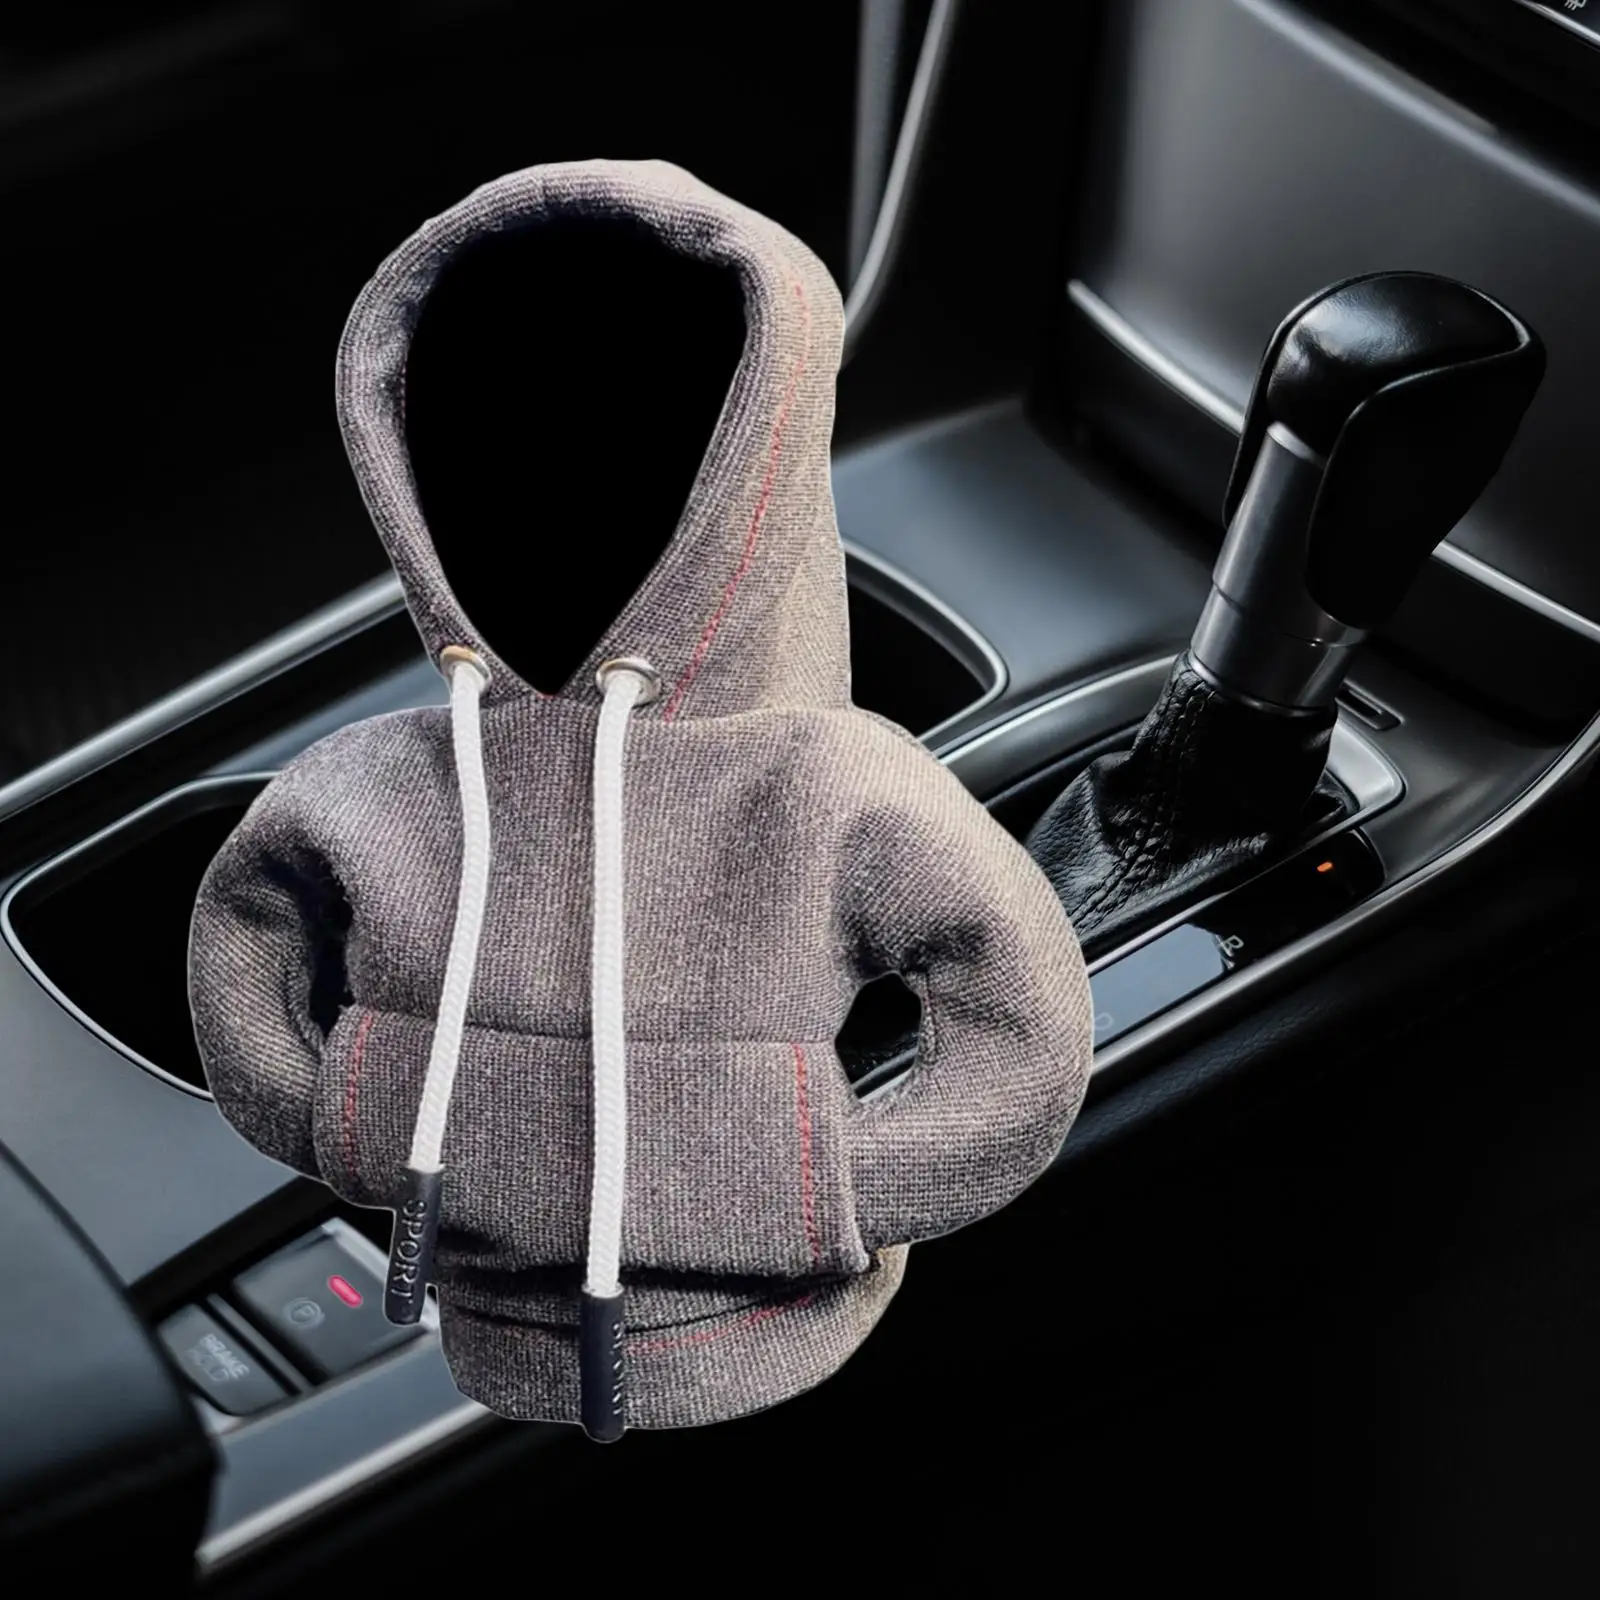 Automotive Gear Shifter Knob Cover Hoodie Sweatshirt Funny Accessories Mini Hoodie for Shifter Shifter Knob Hoodie Cover Sleeve